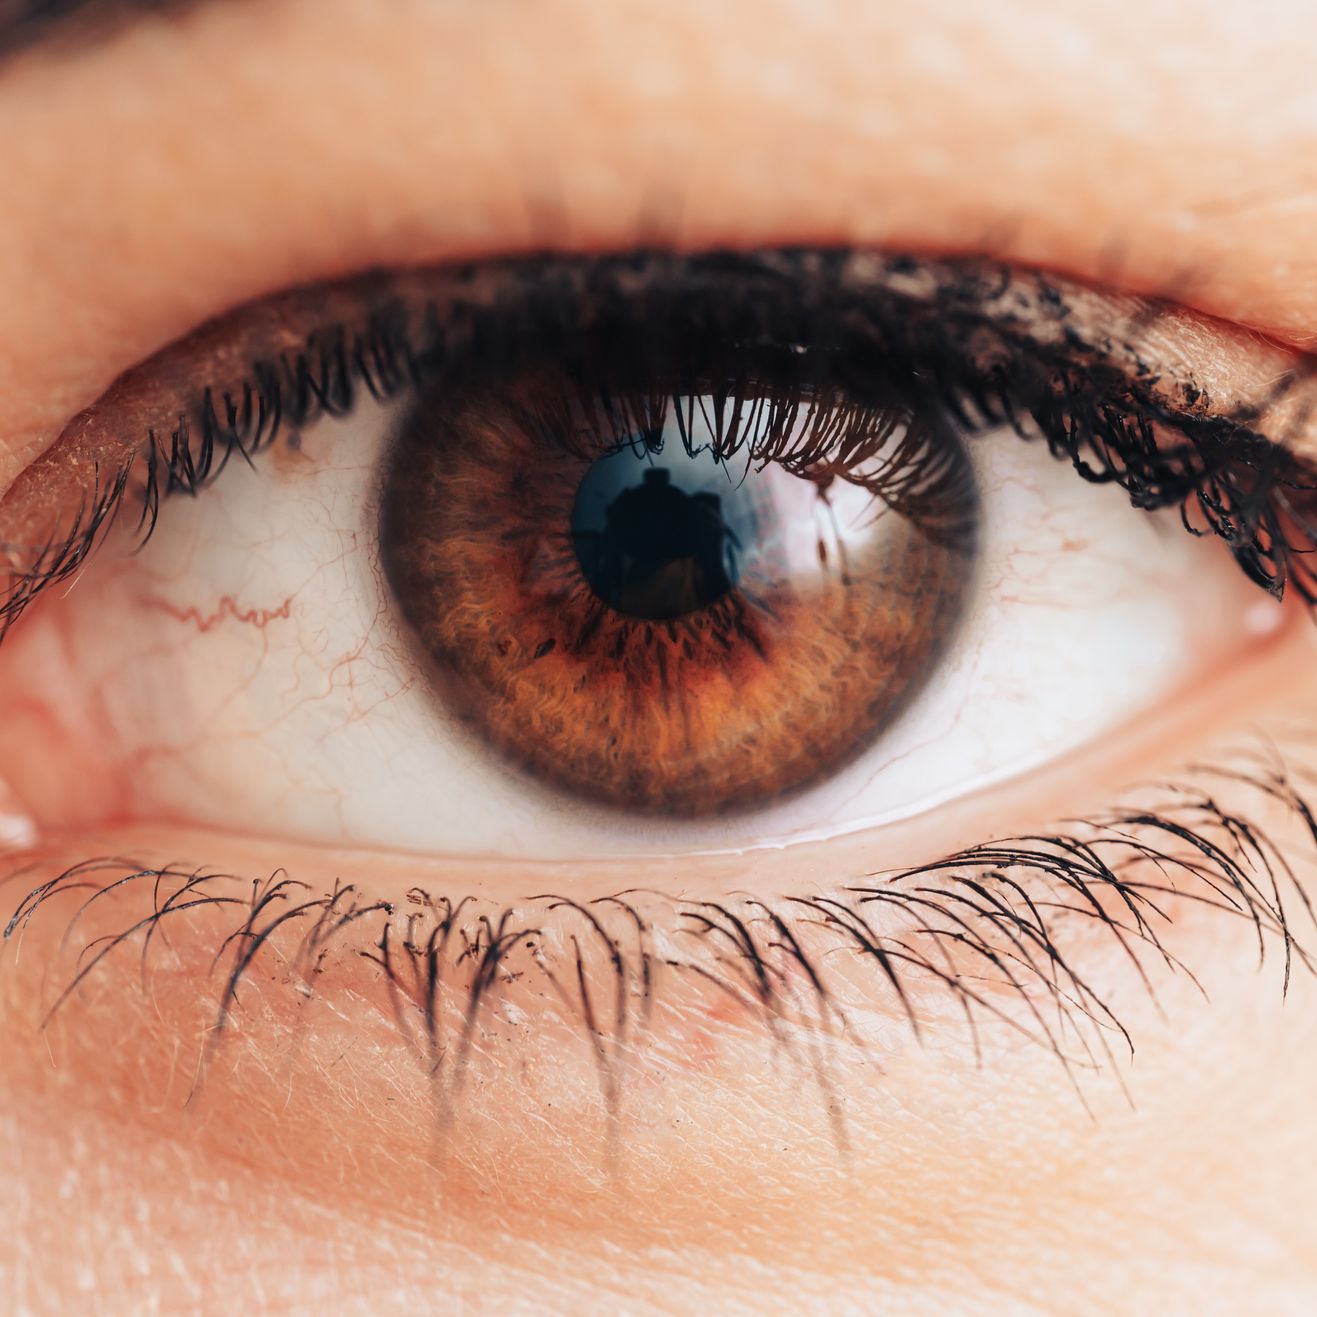 So … a Bunch of People Got Eye Syphilis